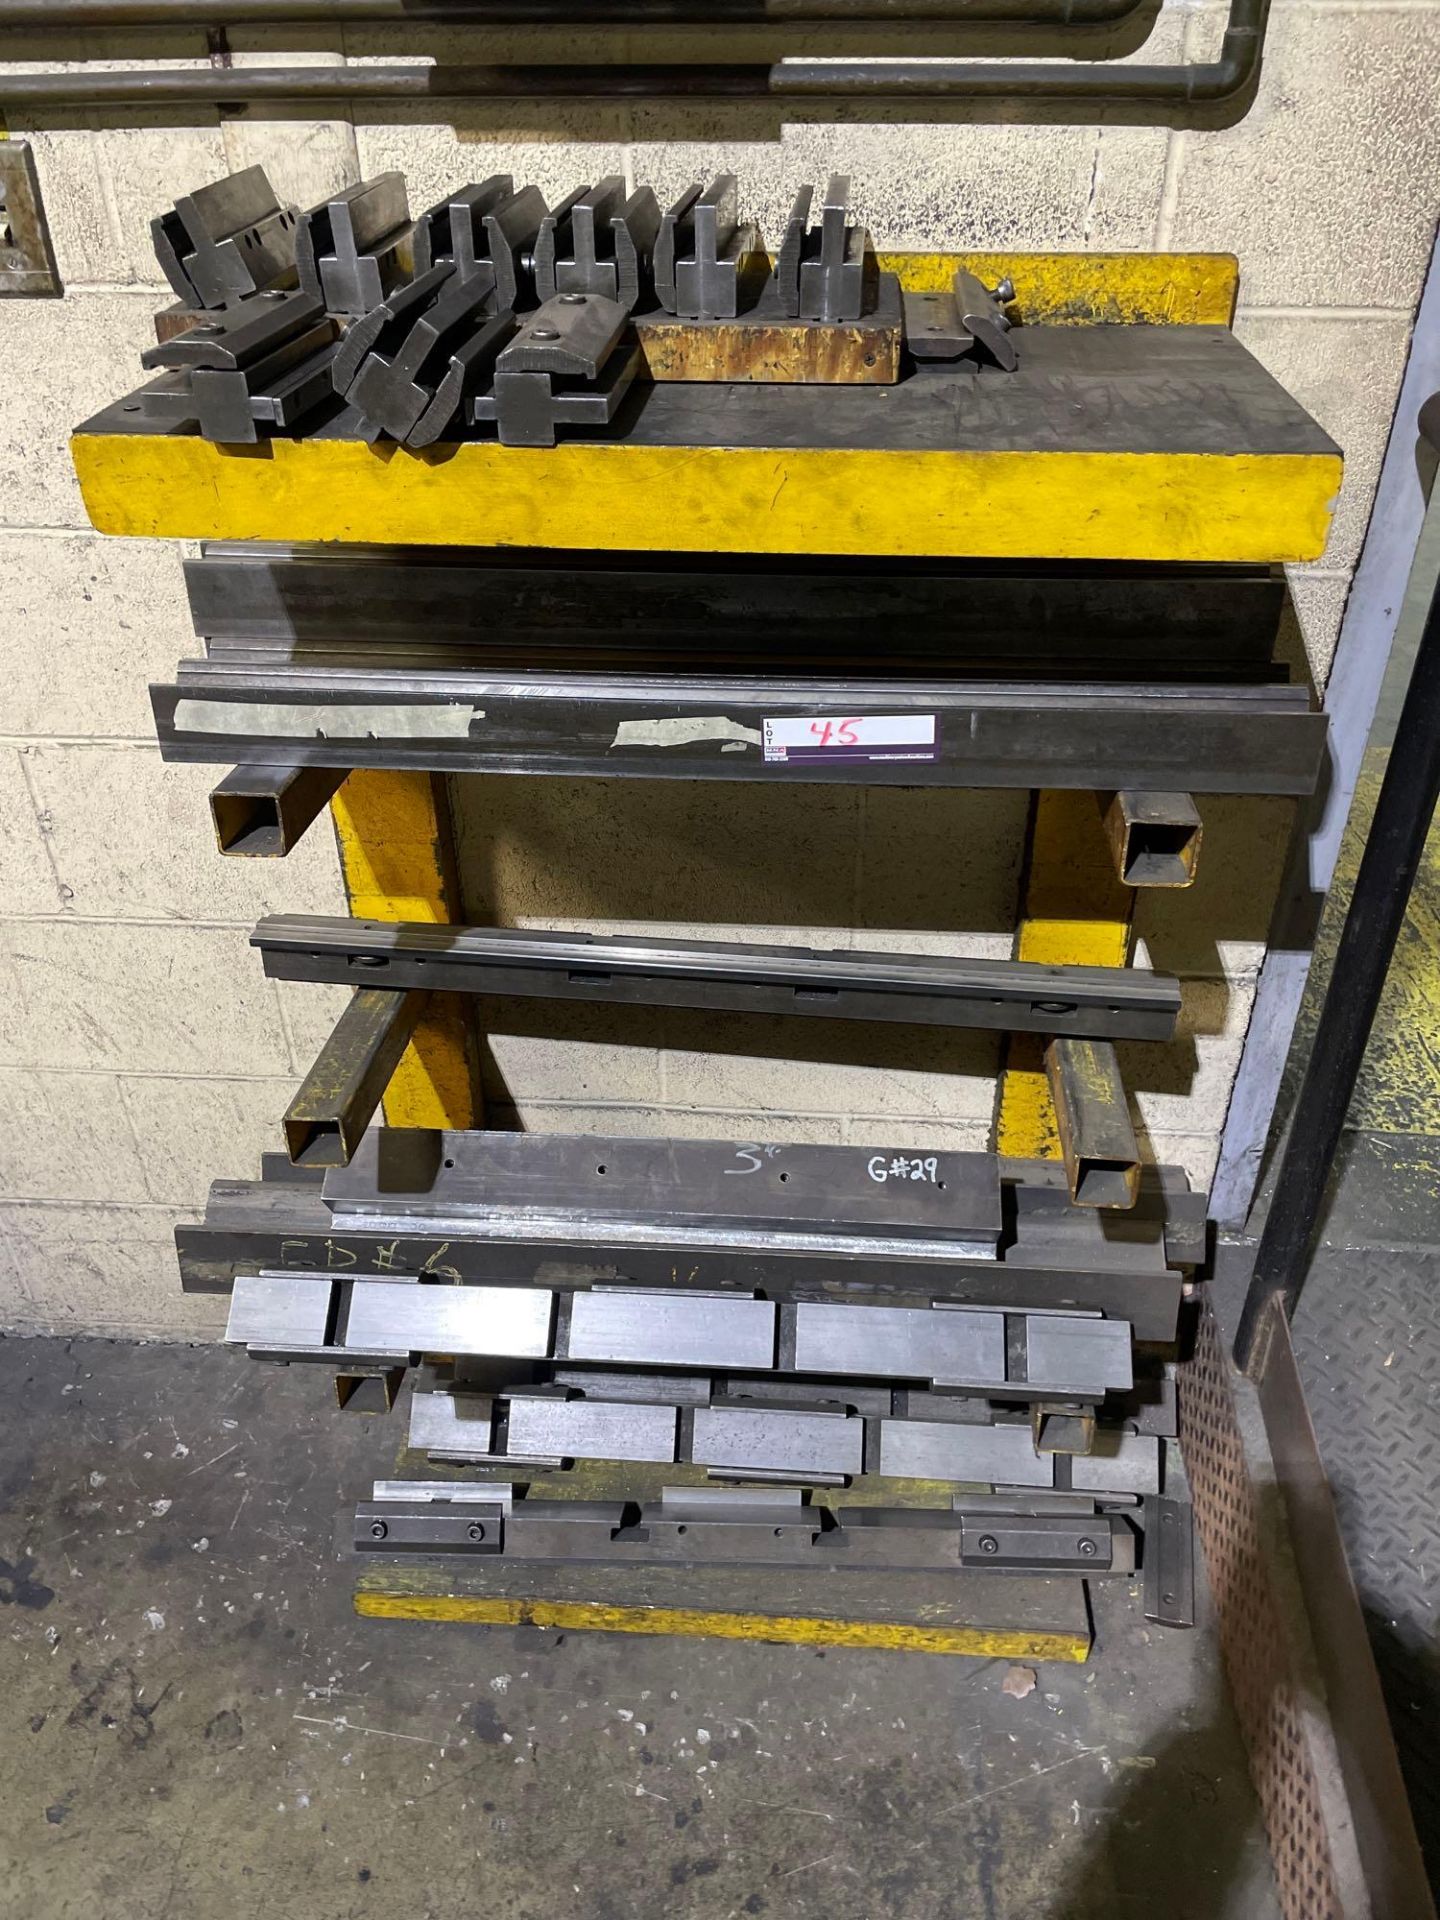 Assorted Dies for Press Brakes with Rack - Image 3 of 3